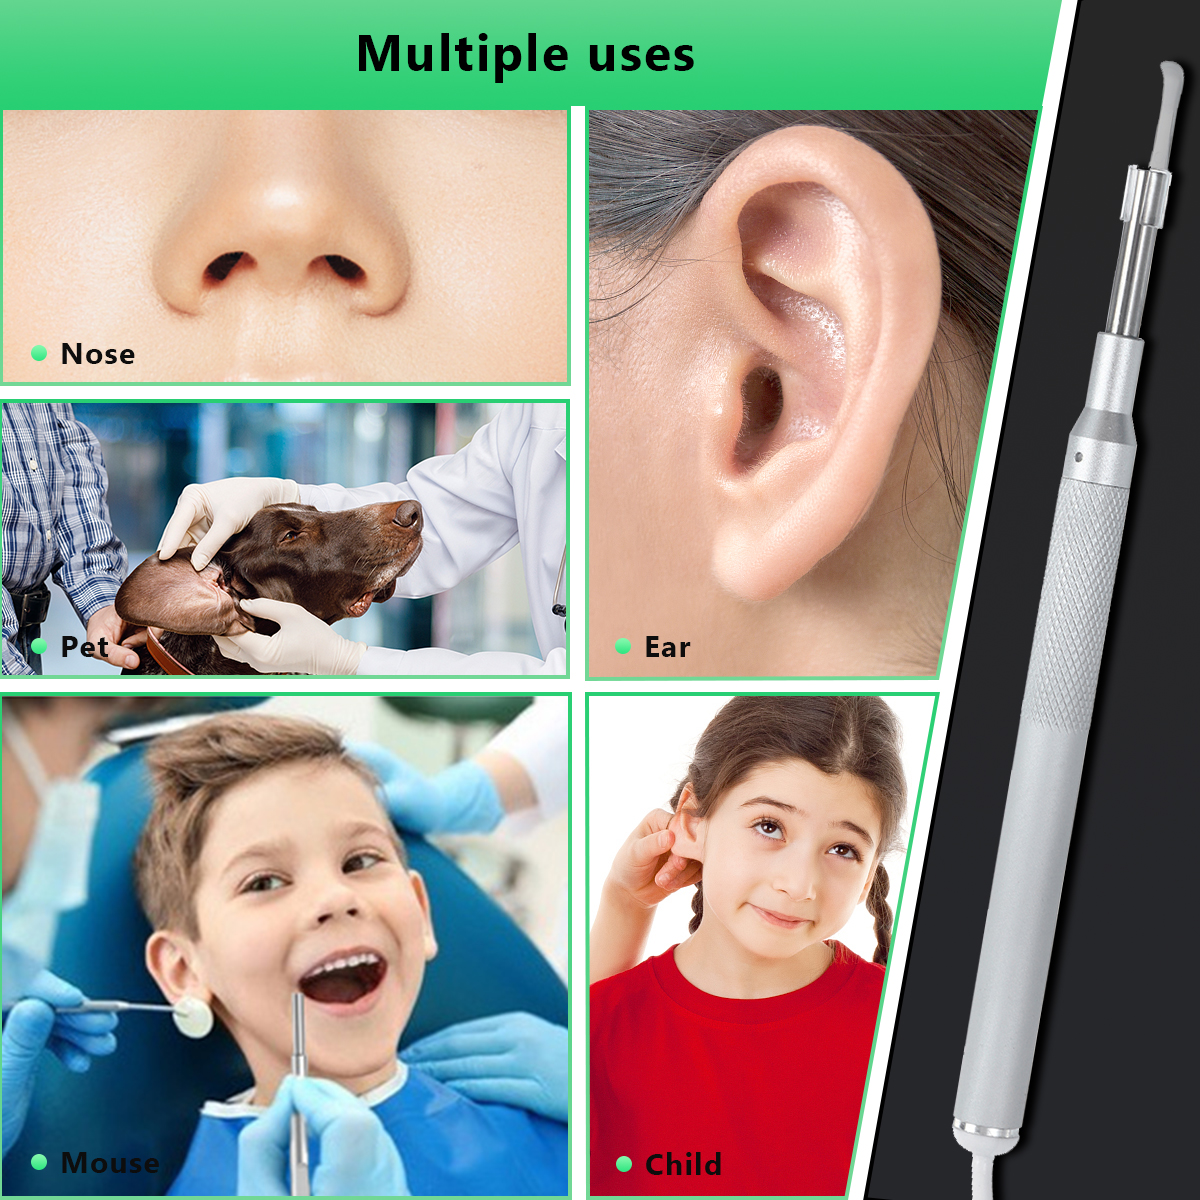 39mm-Visual-Thin-Lens-HD-Ear-Endoscopes-with-Earwax-6-Adjustable-LED-Lights-Ear-Cleaning-Tool-1737017-7